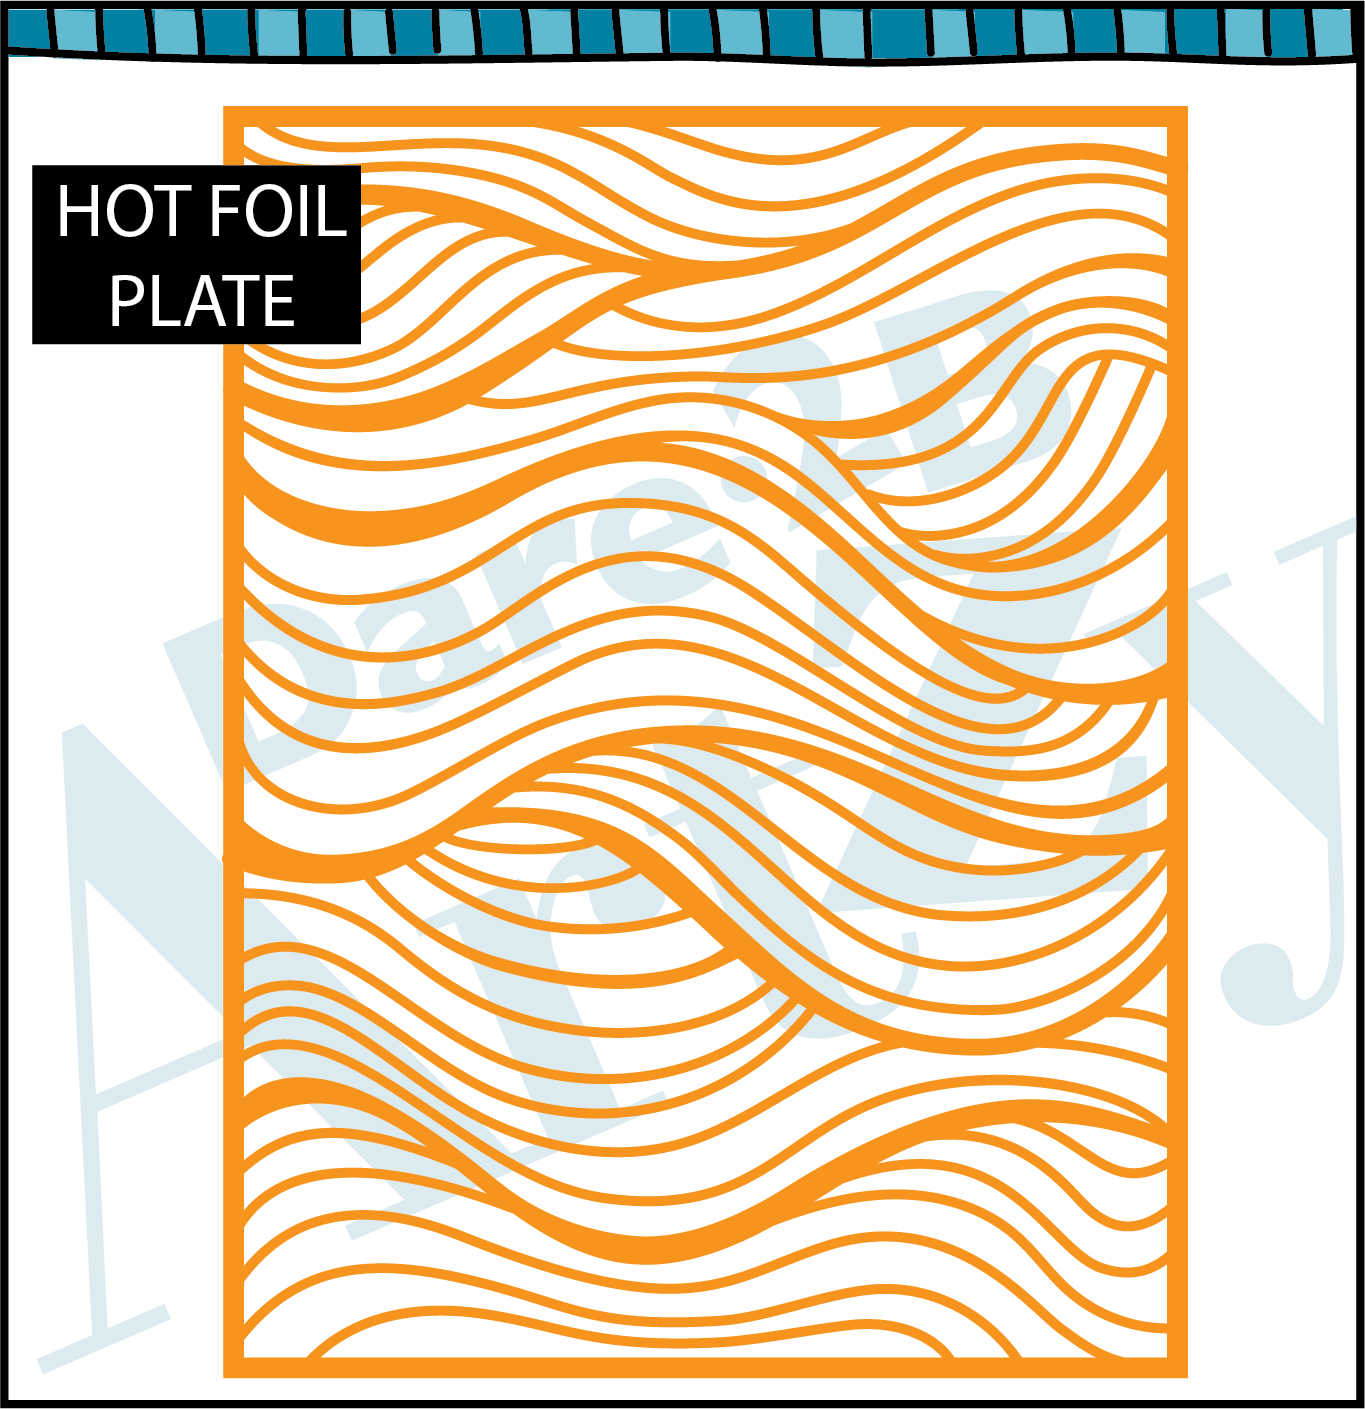 Dare 2B Artzy offers NEW hot foil plates compatible with the leading hot foil systems